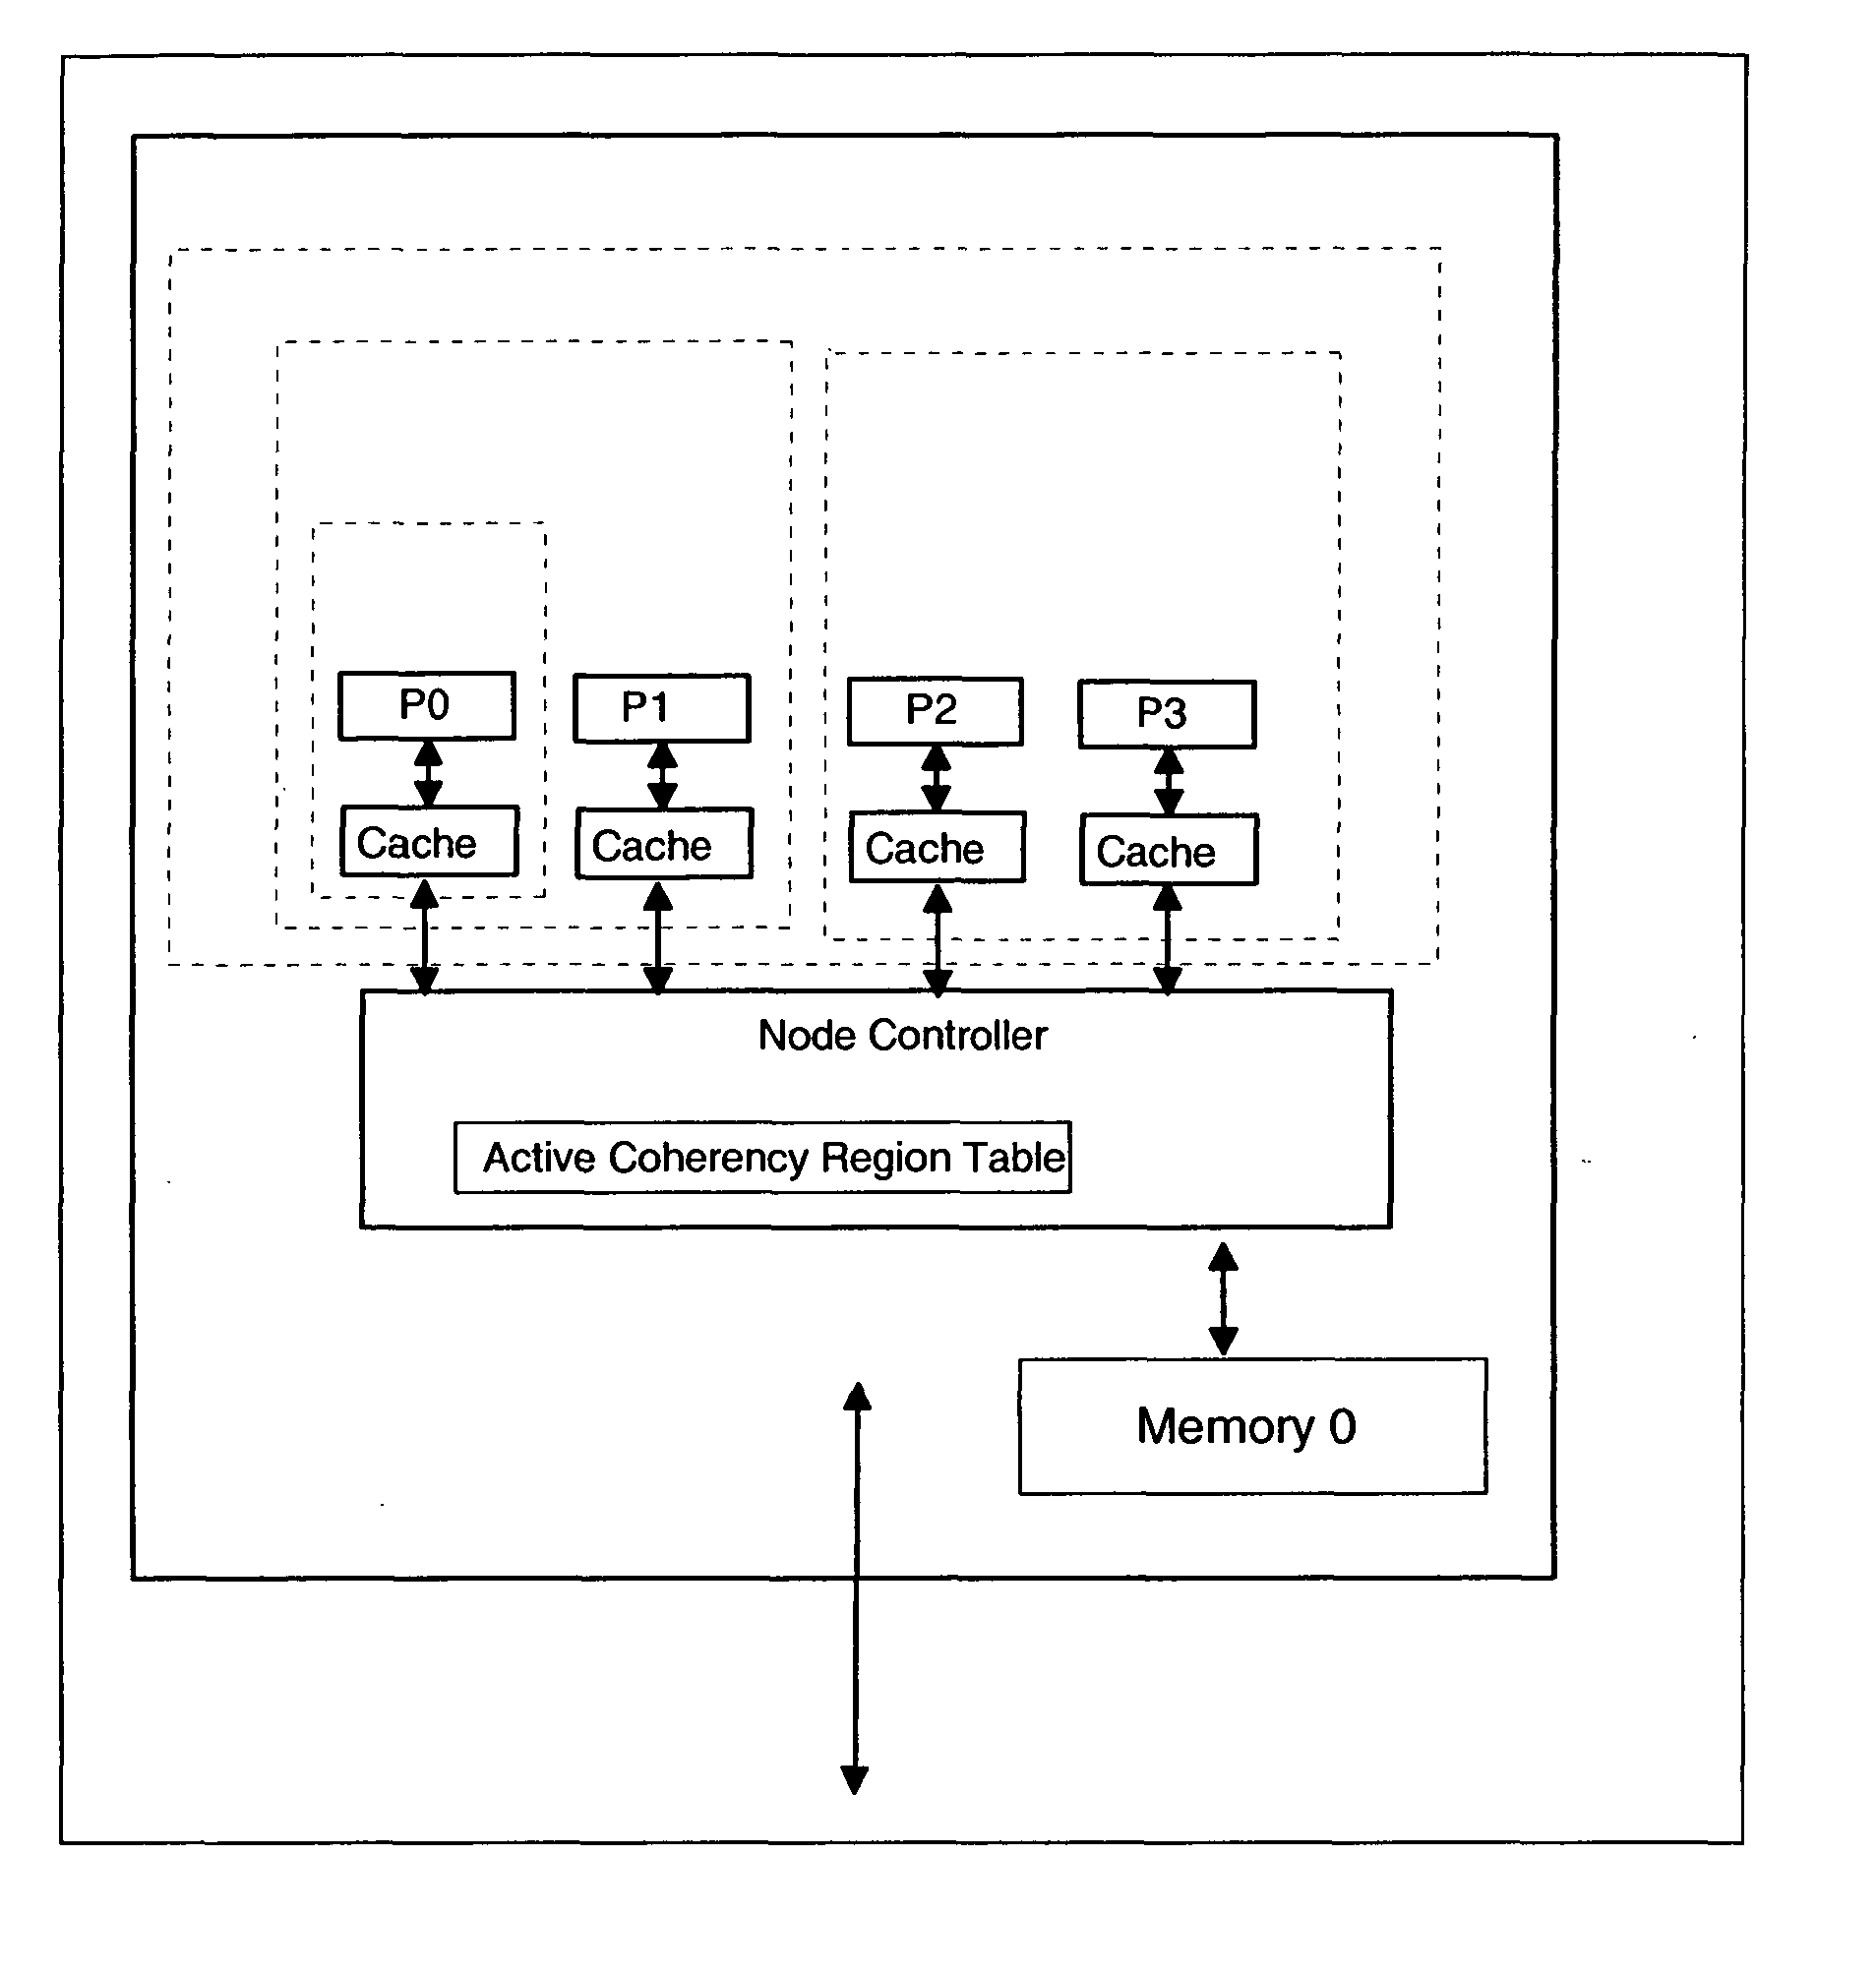 Multiprocessor computer system having multiple coherency regions and software process migration between coherency regions without cache purges